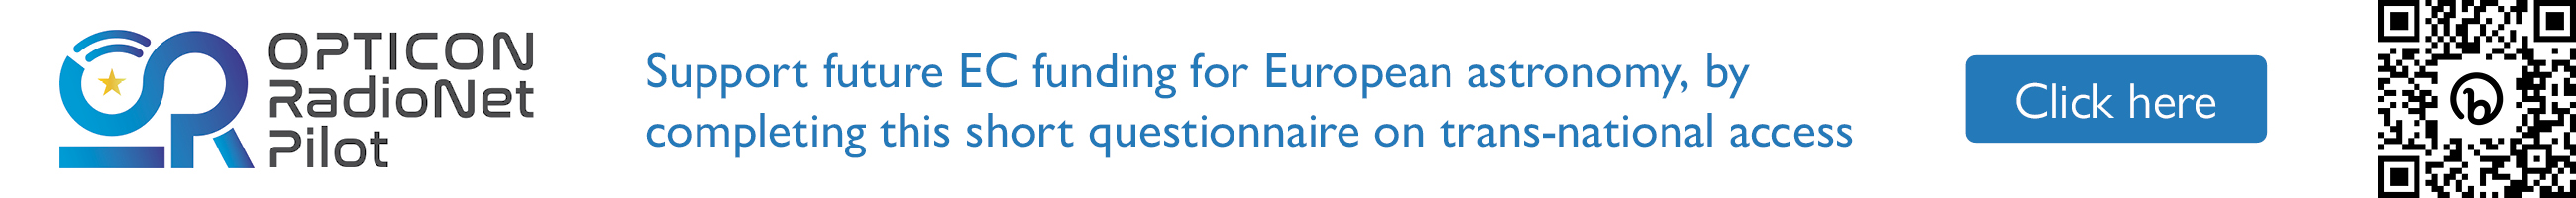 ORP, support future EC funding for European astronomy